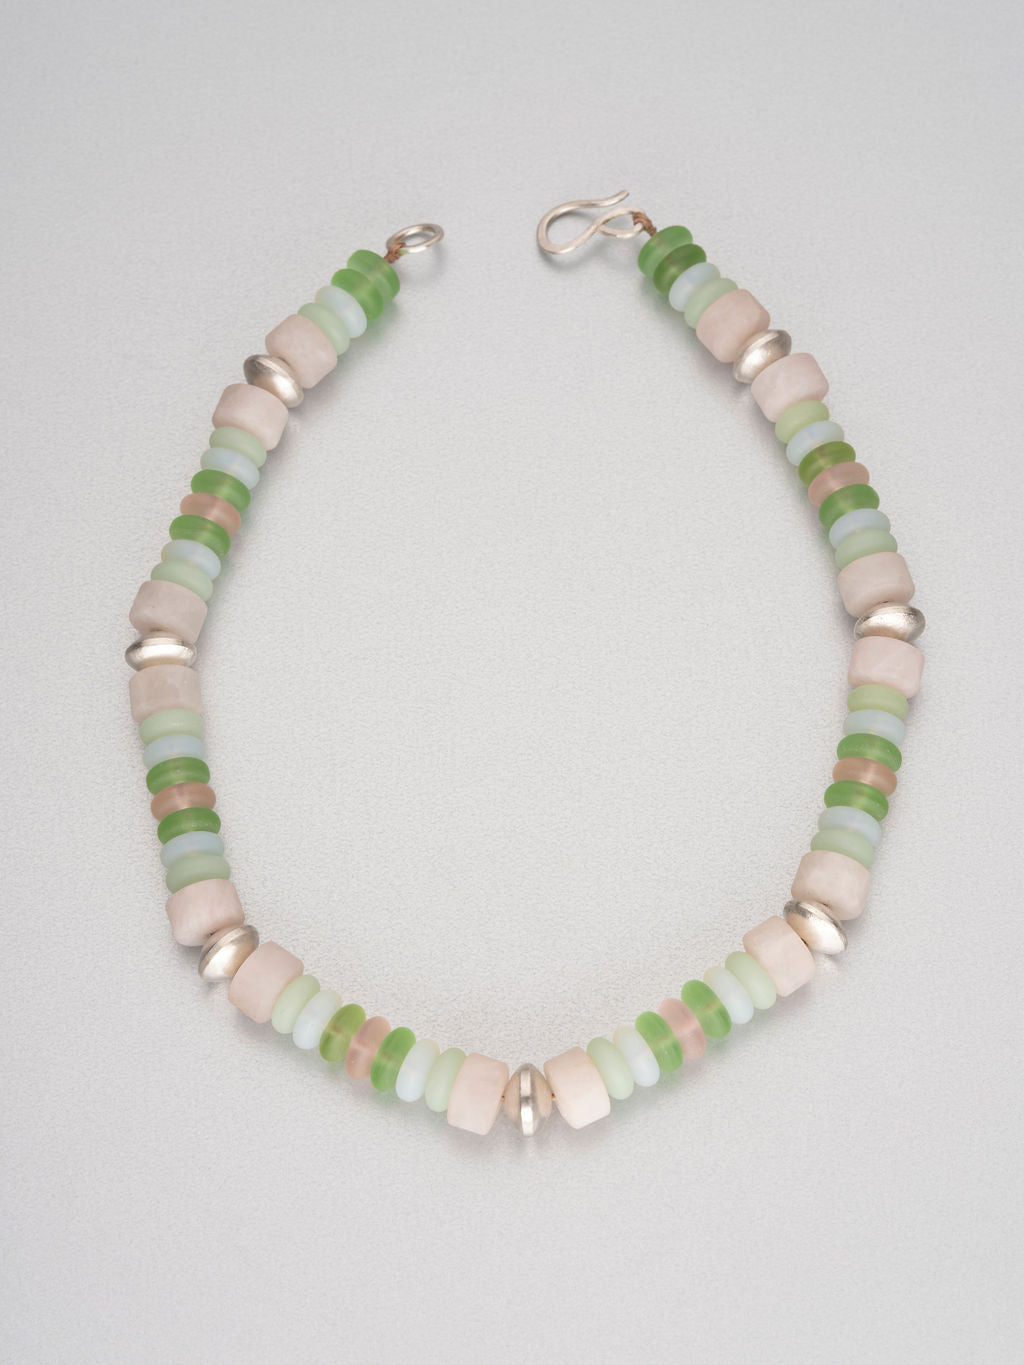 Beaded necklace with sea glass, rose quartz and silver.